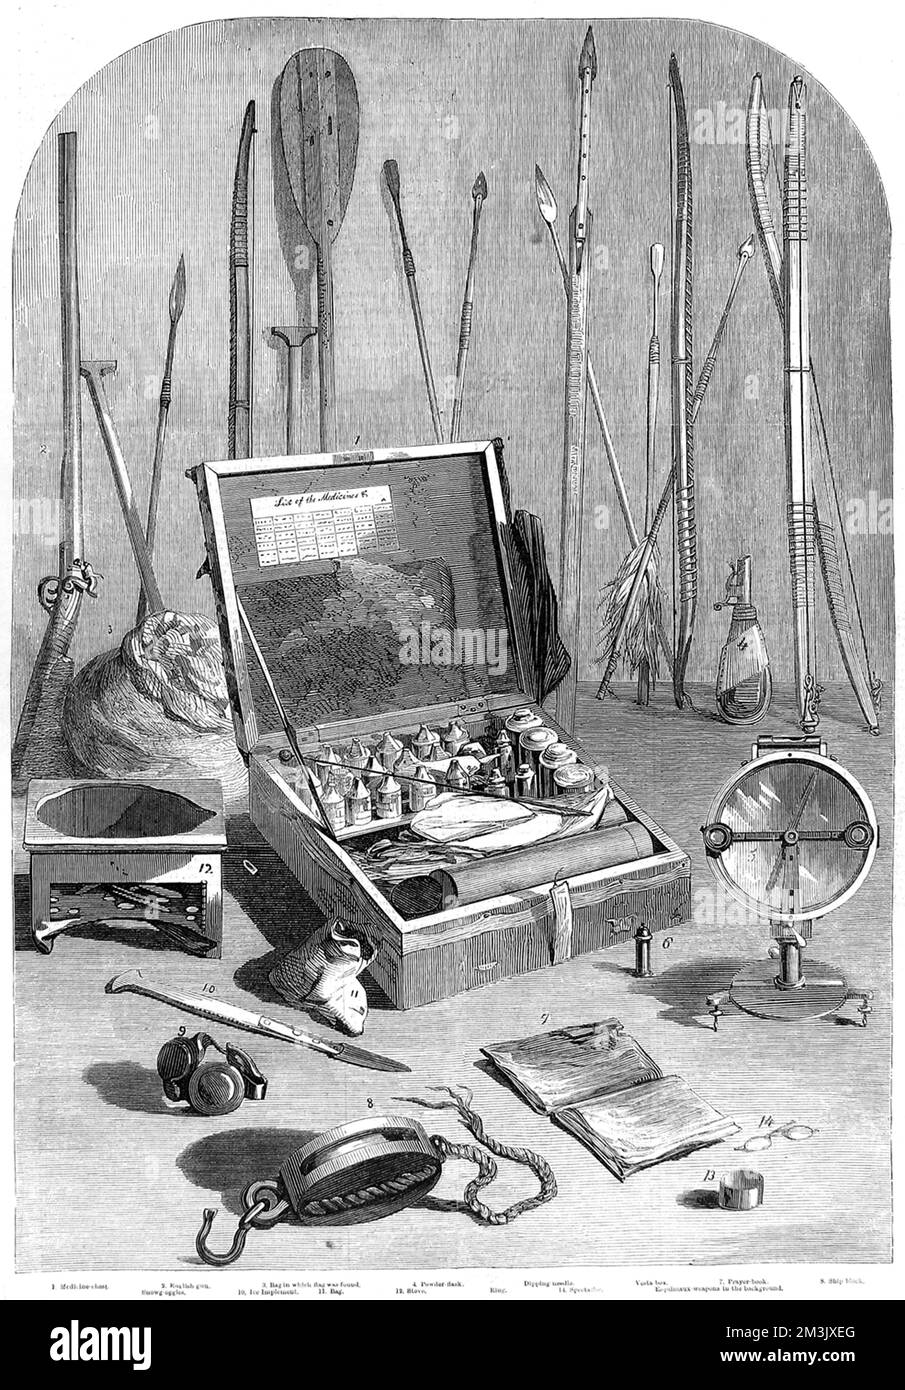 The relics of Sir John Franklin's ill-fated Arctic expedition of 1845, which were found by Francis Leopold McClintock in 1859. The items include a medicine chest, a gun, a dipping needle, a stove, snow goggles, a Vesta-box, a prayer book and some spectacles. In the background are also some Eskimo weapons which McClintock purchased.  In 1845 the British Admiralty sent two polar exploration ships, HMS 'Erebus' and HMS 'Terror', to look for the Northwest passage round the northern coast of Canada. The expedition, commanded by Sir John Franklin, disappeared from view late in 1845 and none of Stock Photo